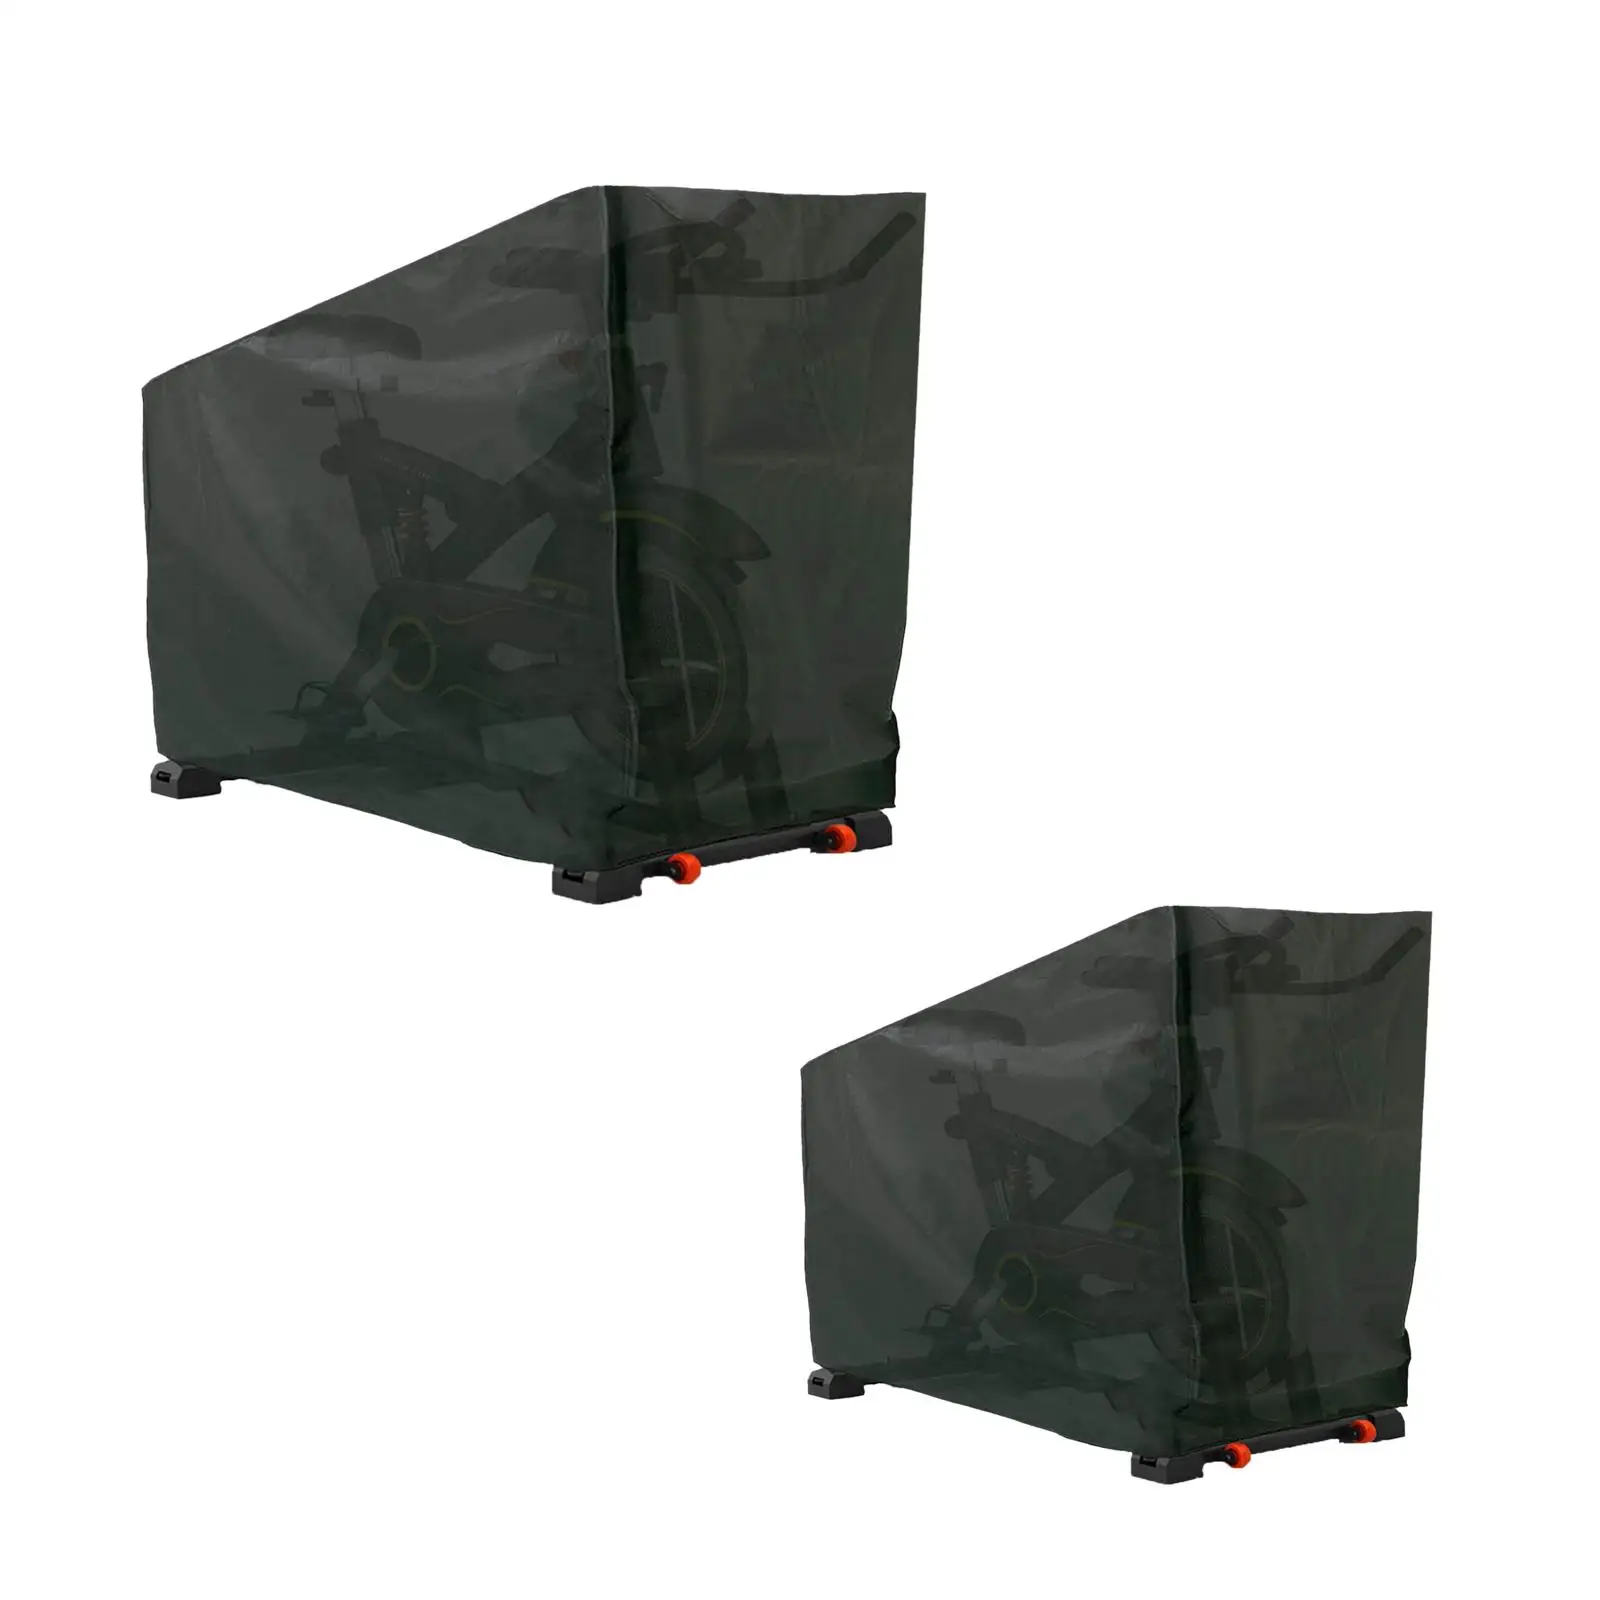 Indoor Cycling Stationary Cover Storage Cover Oxford Universal Wind Proof Waterproof Dust Cover for Outside Home Storage